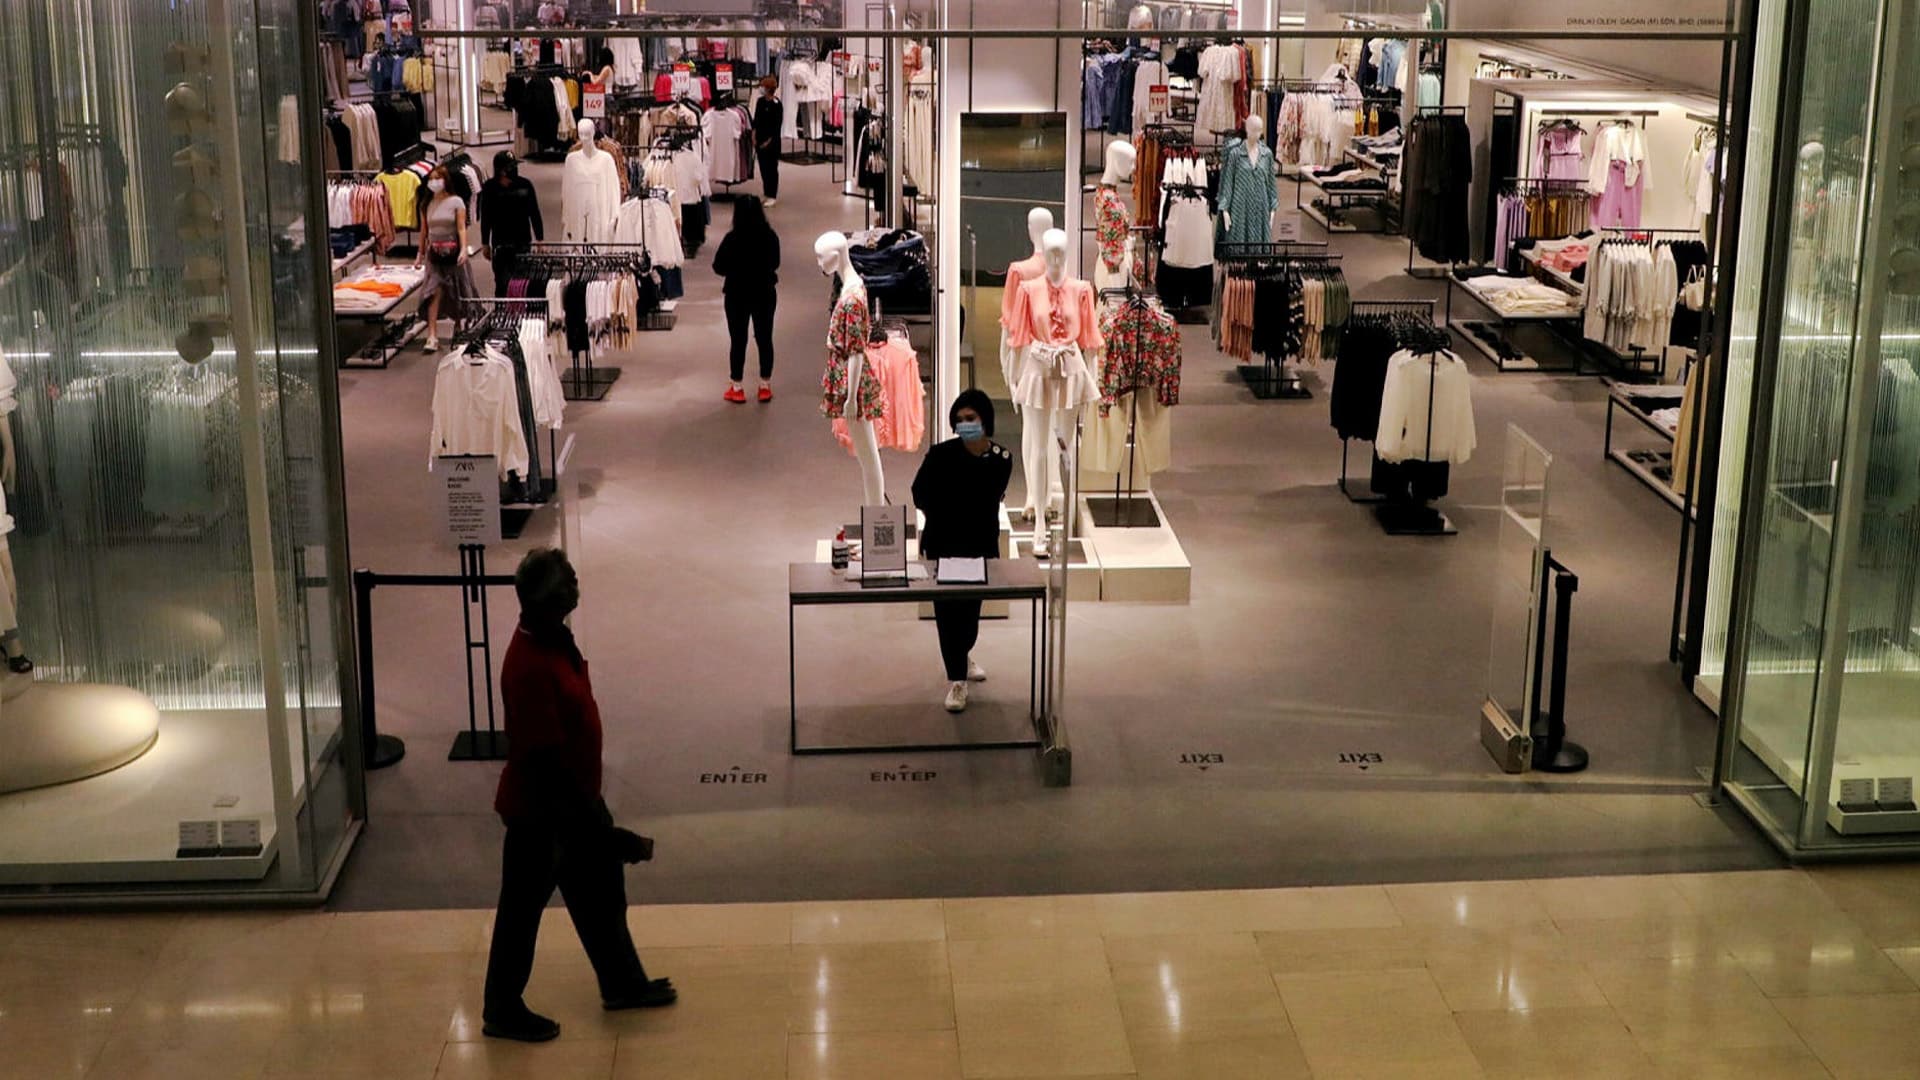 Covid-19 impact: Fashion retailers' revenue to hit pre-Covid levels in FY23, says report